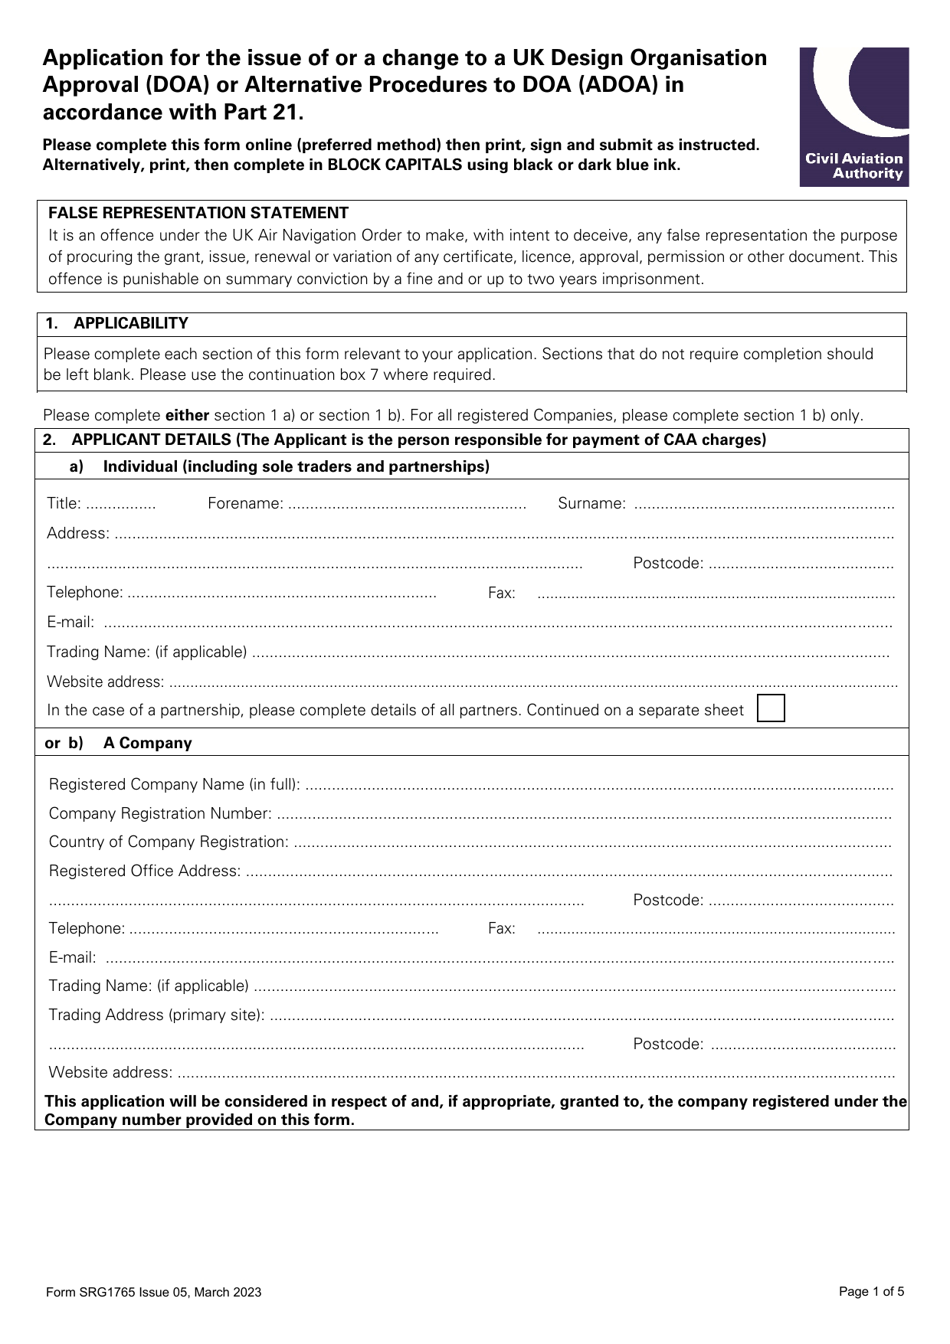 Form SRG1765 Application for the Issue of or a Change to a UK Design Organisation Approval (Doa) or Alternative Procedures to Doa (Adoa) in Accordance With Part 21 - United Kingdom, Page 1